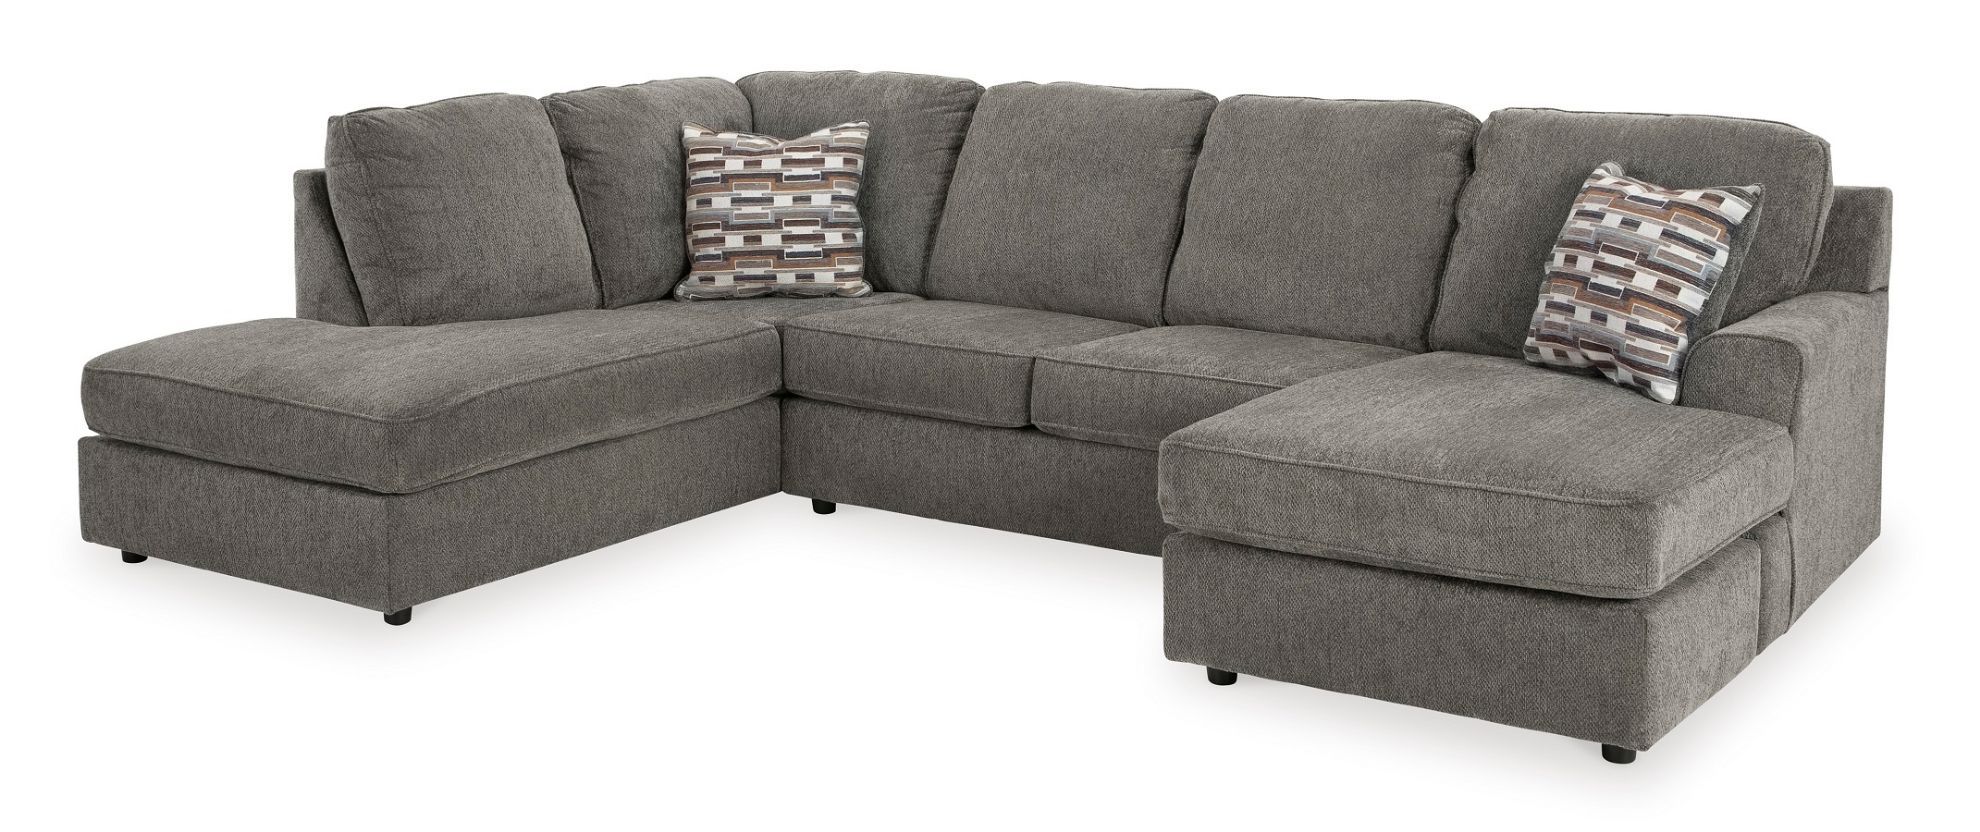 Ophannon 2pc Sectional